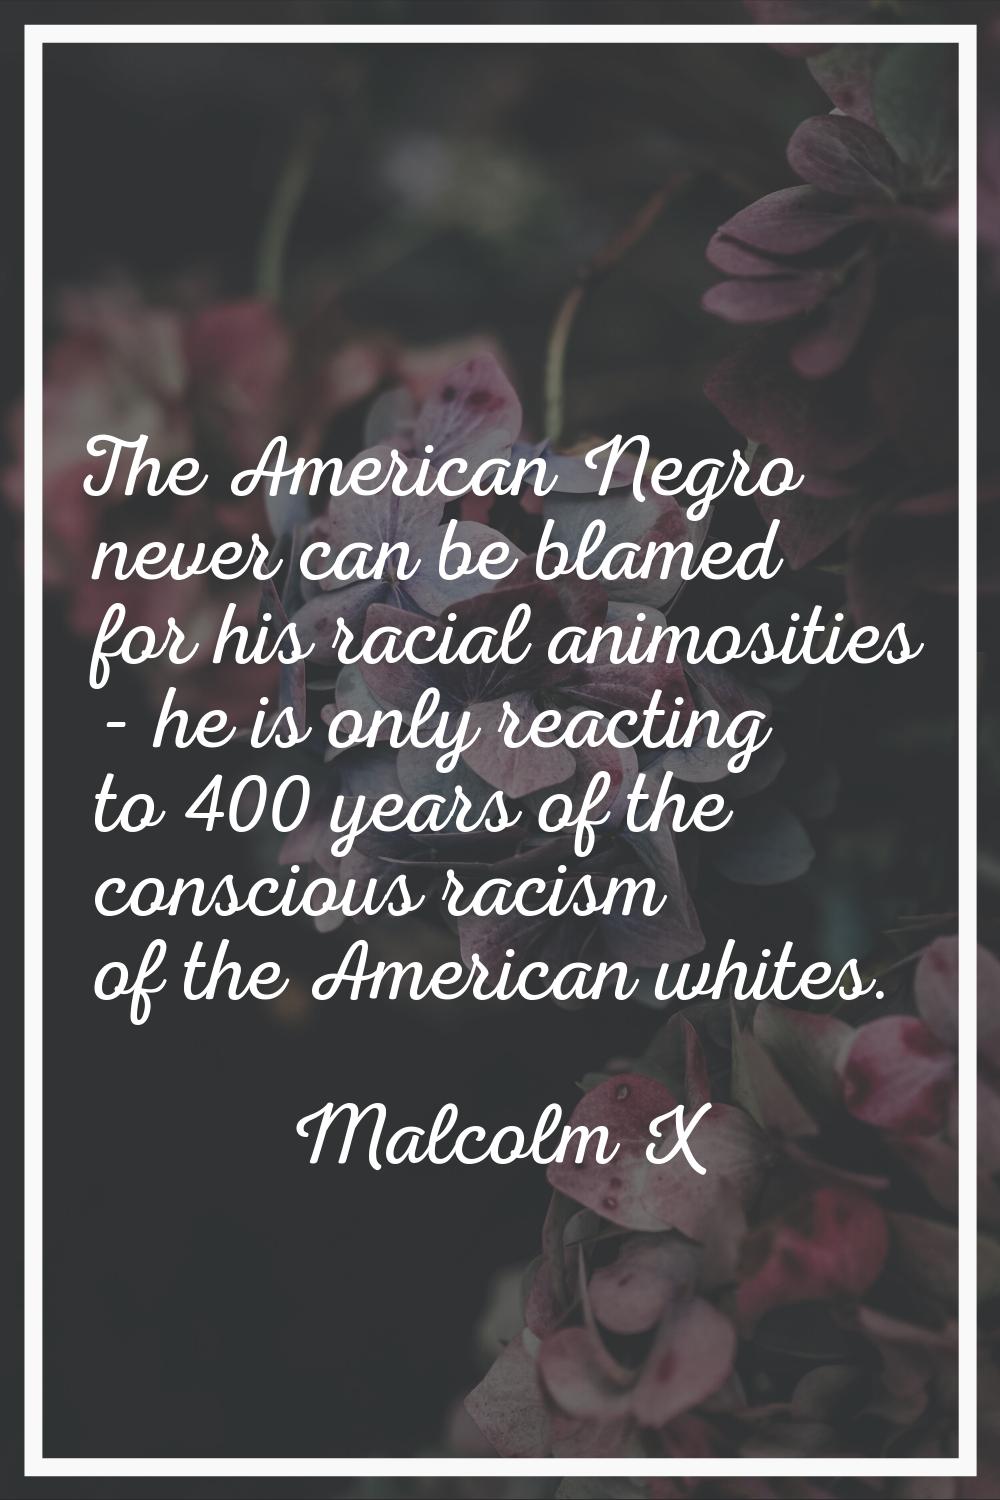 The American Negro never can be blamed for his racial animosities - he is only reacting to 400 year